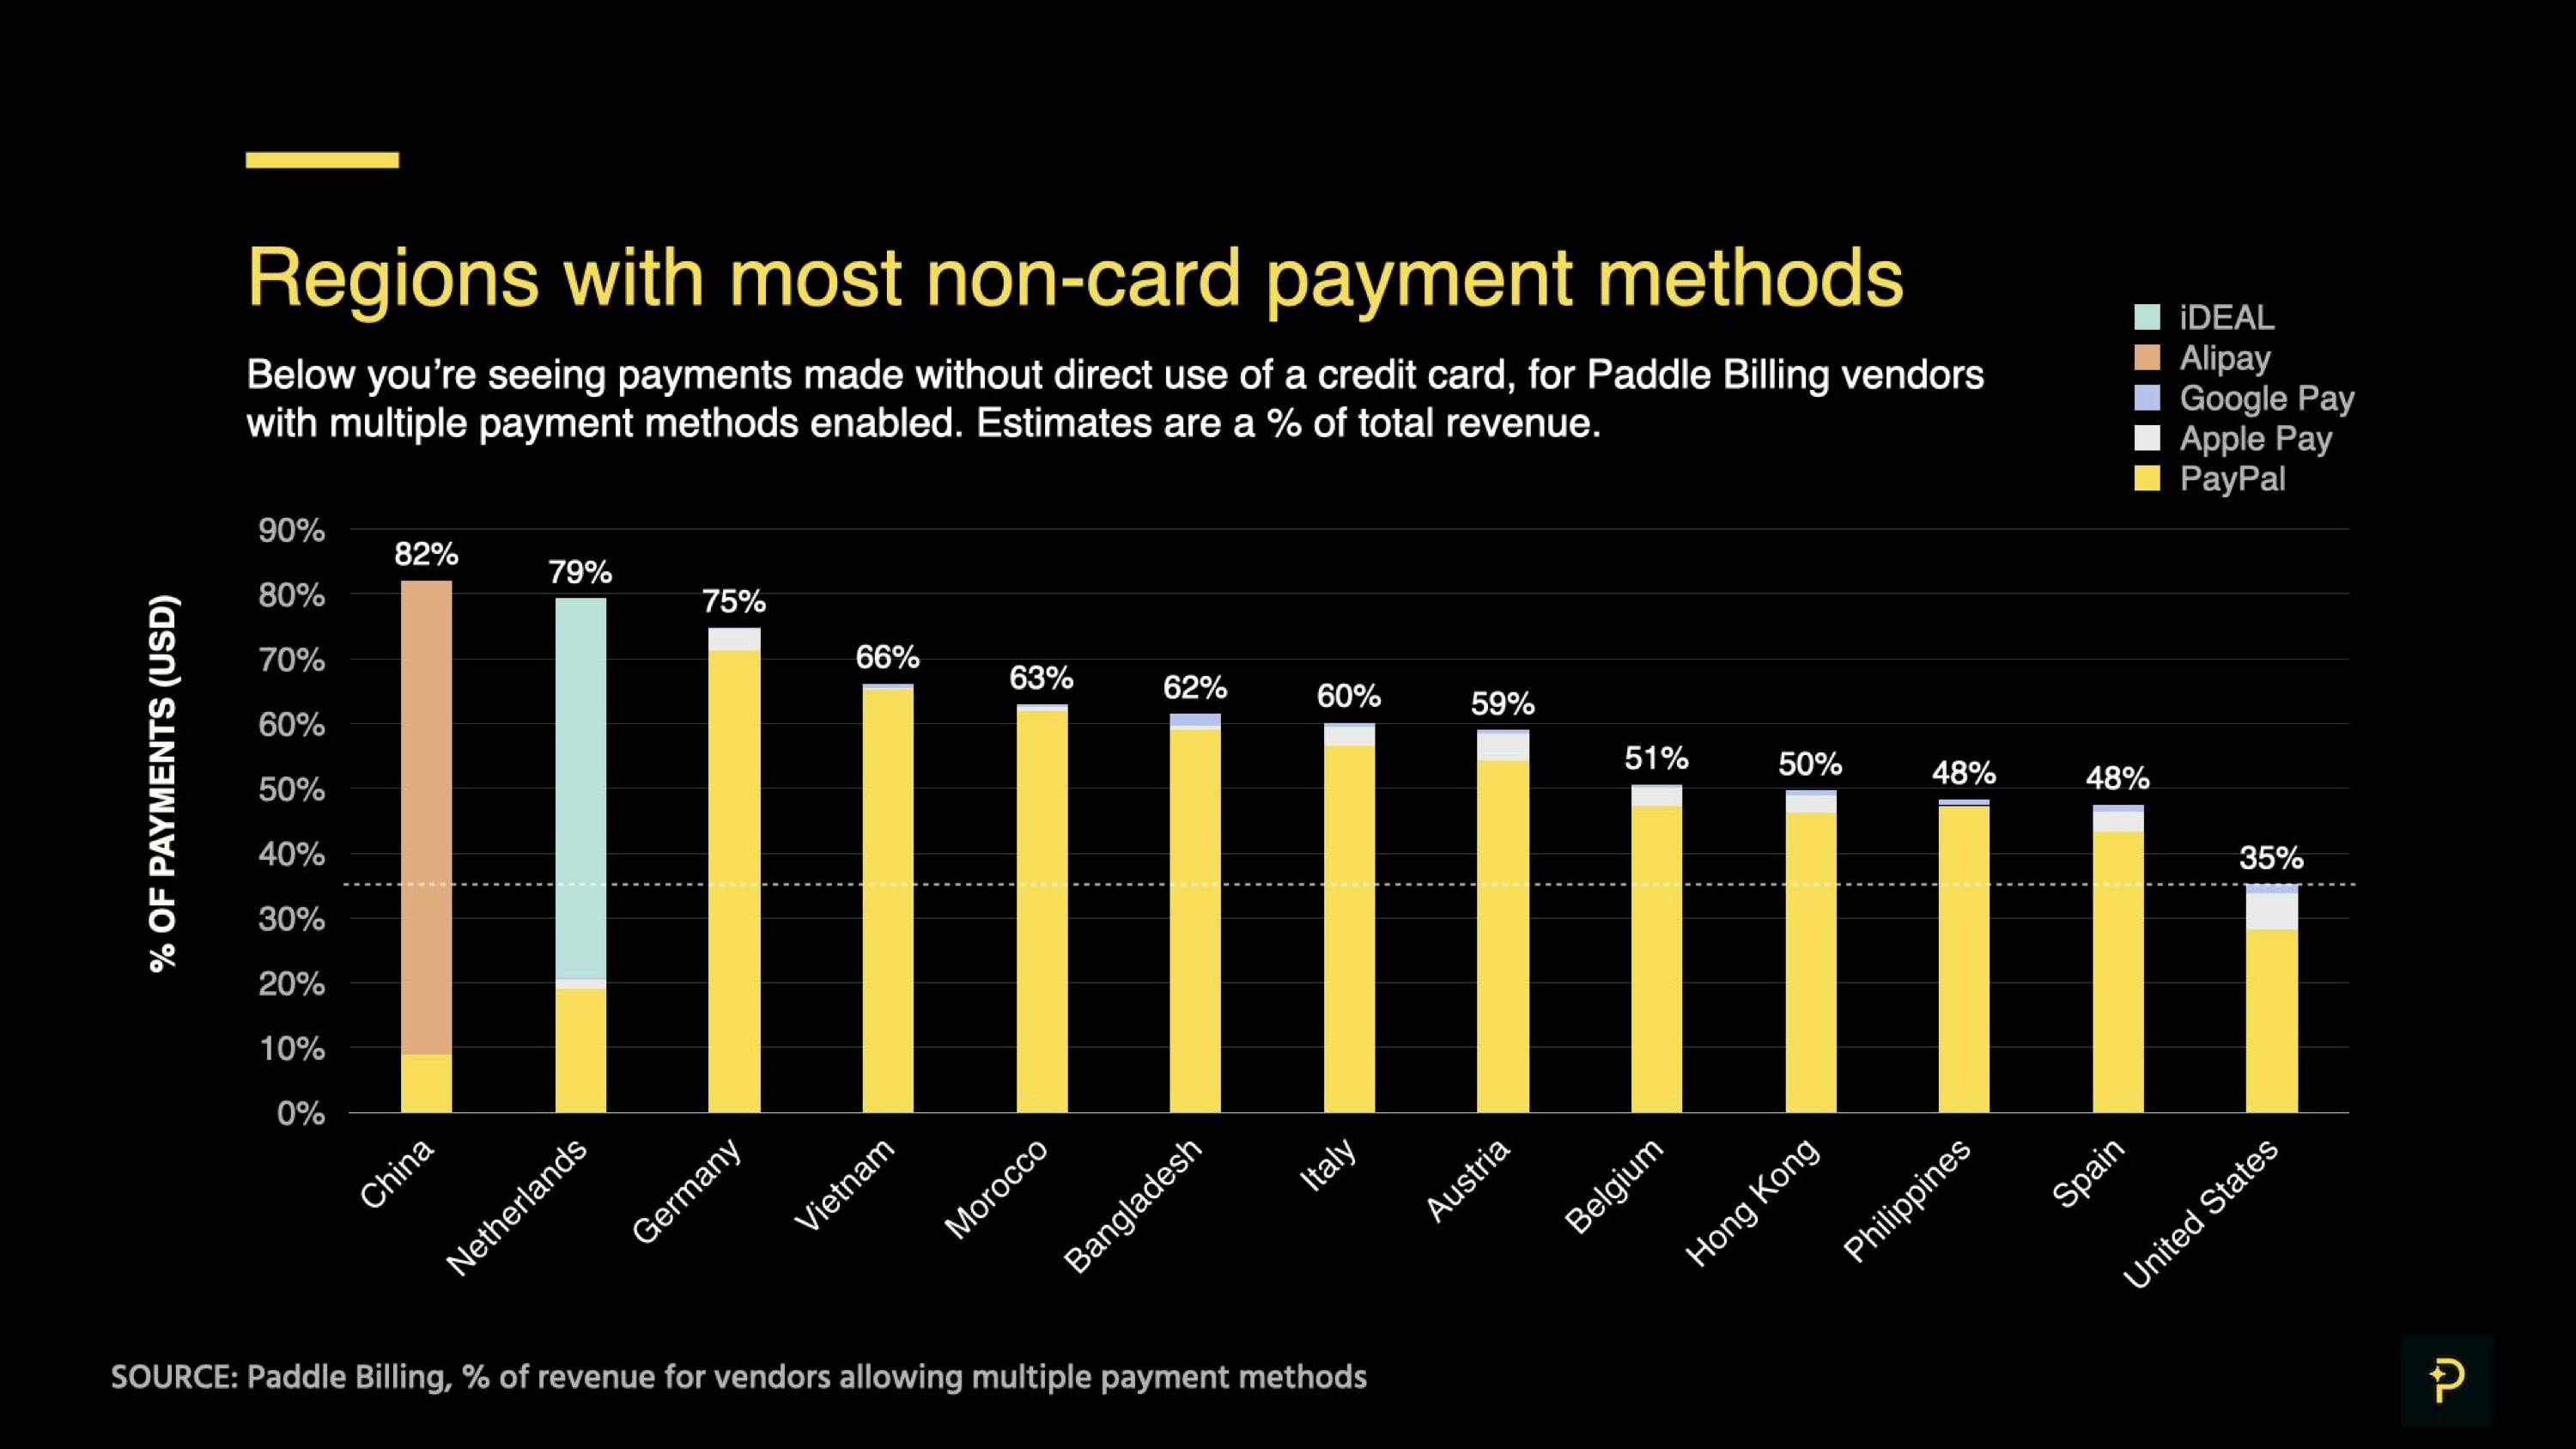 Regions with most non-card payment methods